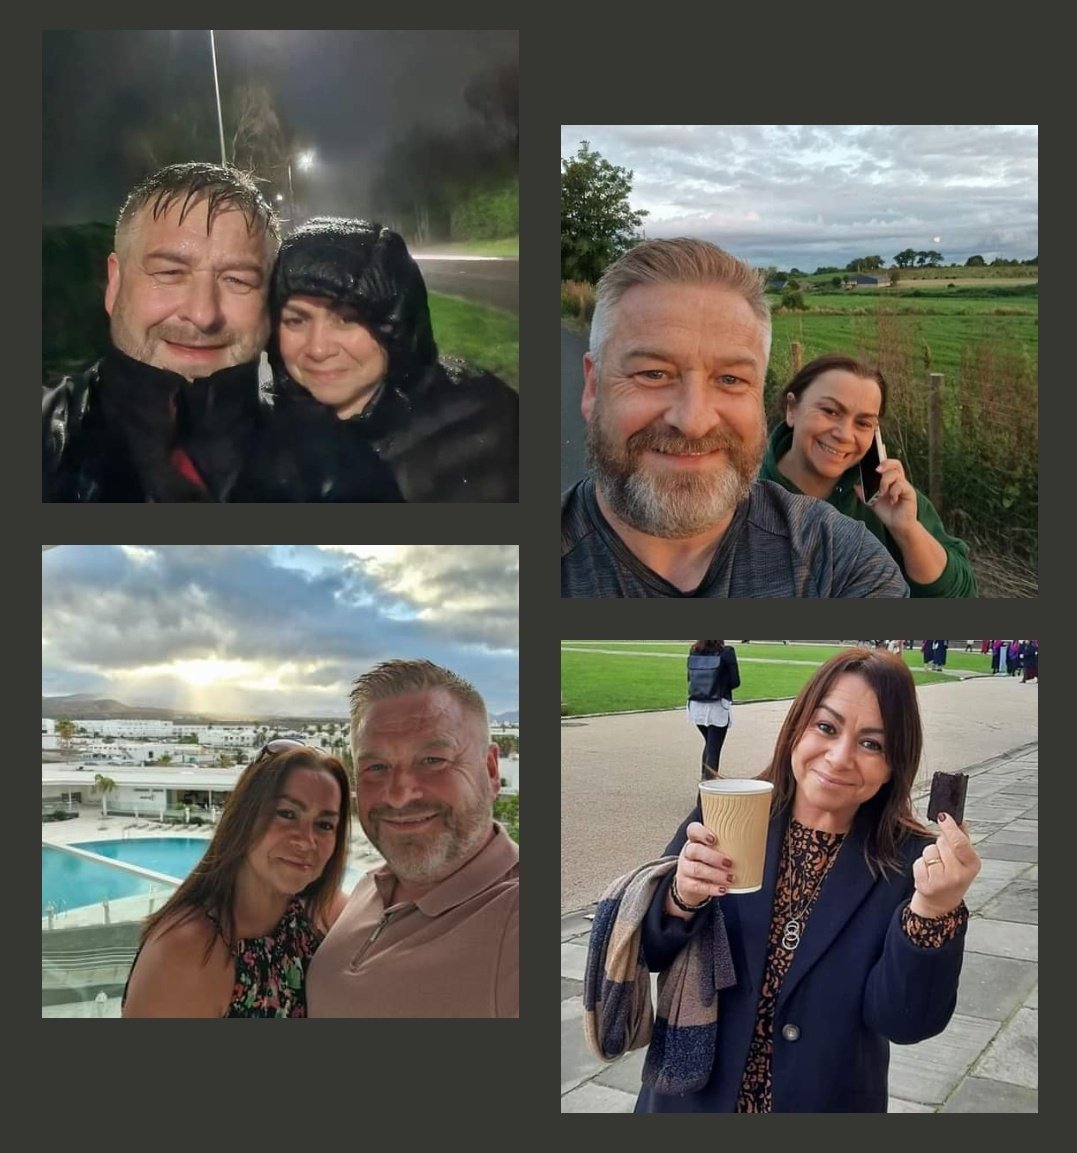 A big Happy Birthday to the whiff... Andrea My walking buddy, my best friend and my rock. I hope you have a great day and weekend. Love always....from myself and the kids. X